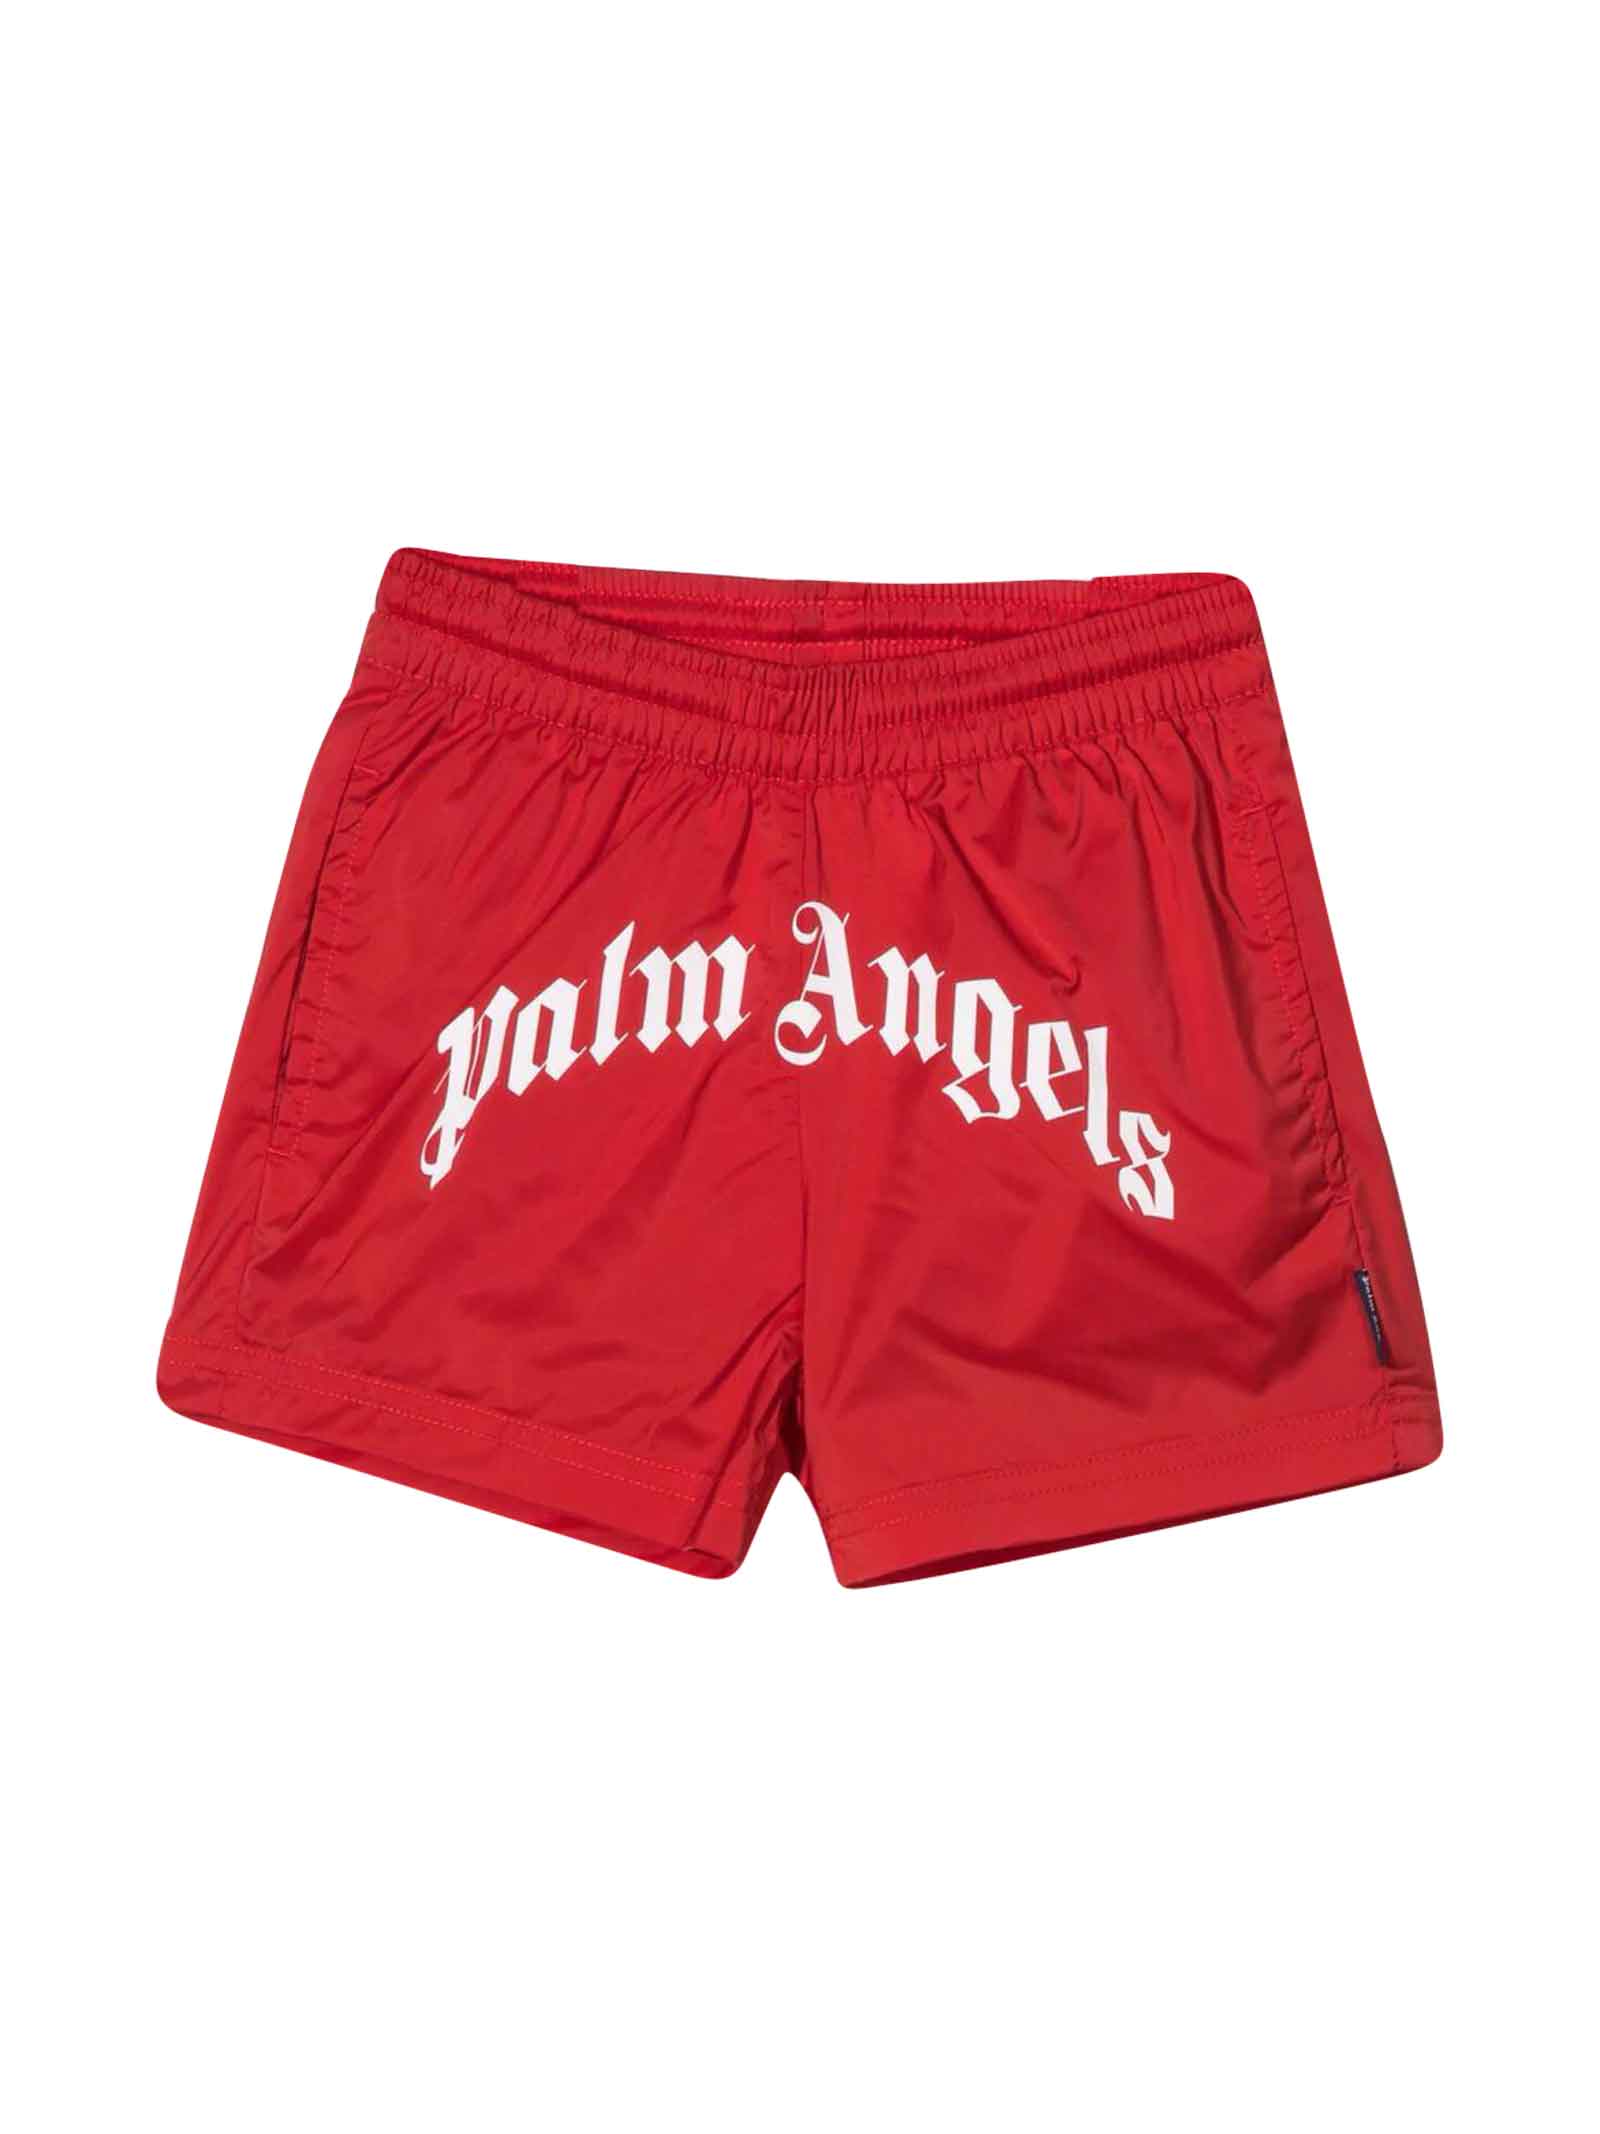 Palm Angels Red Swimsuit Boy